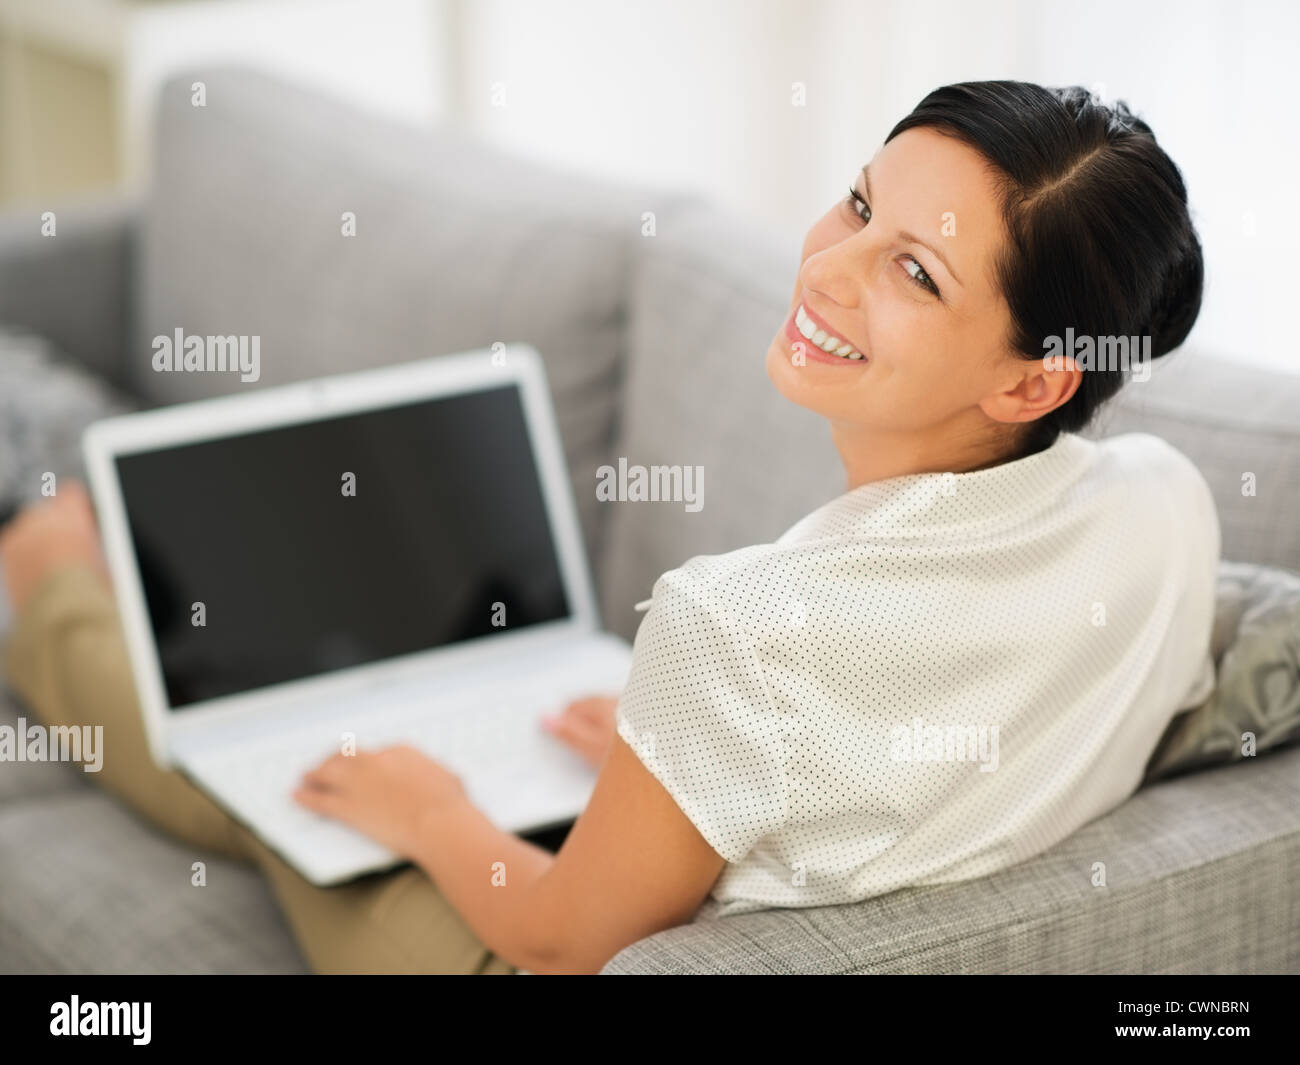 Smiling young woman laying on couch and working on laptop Stock Photo